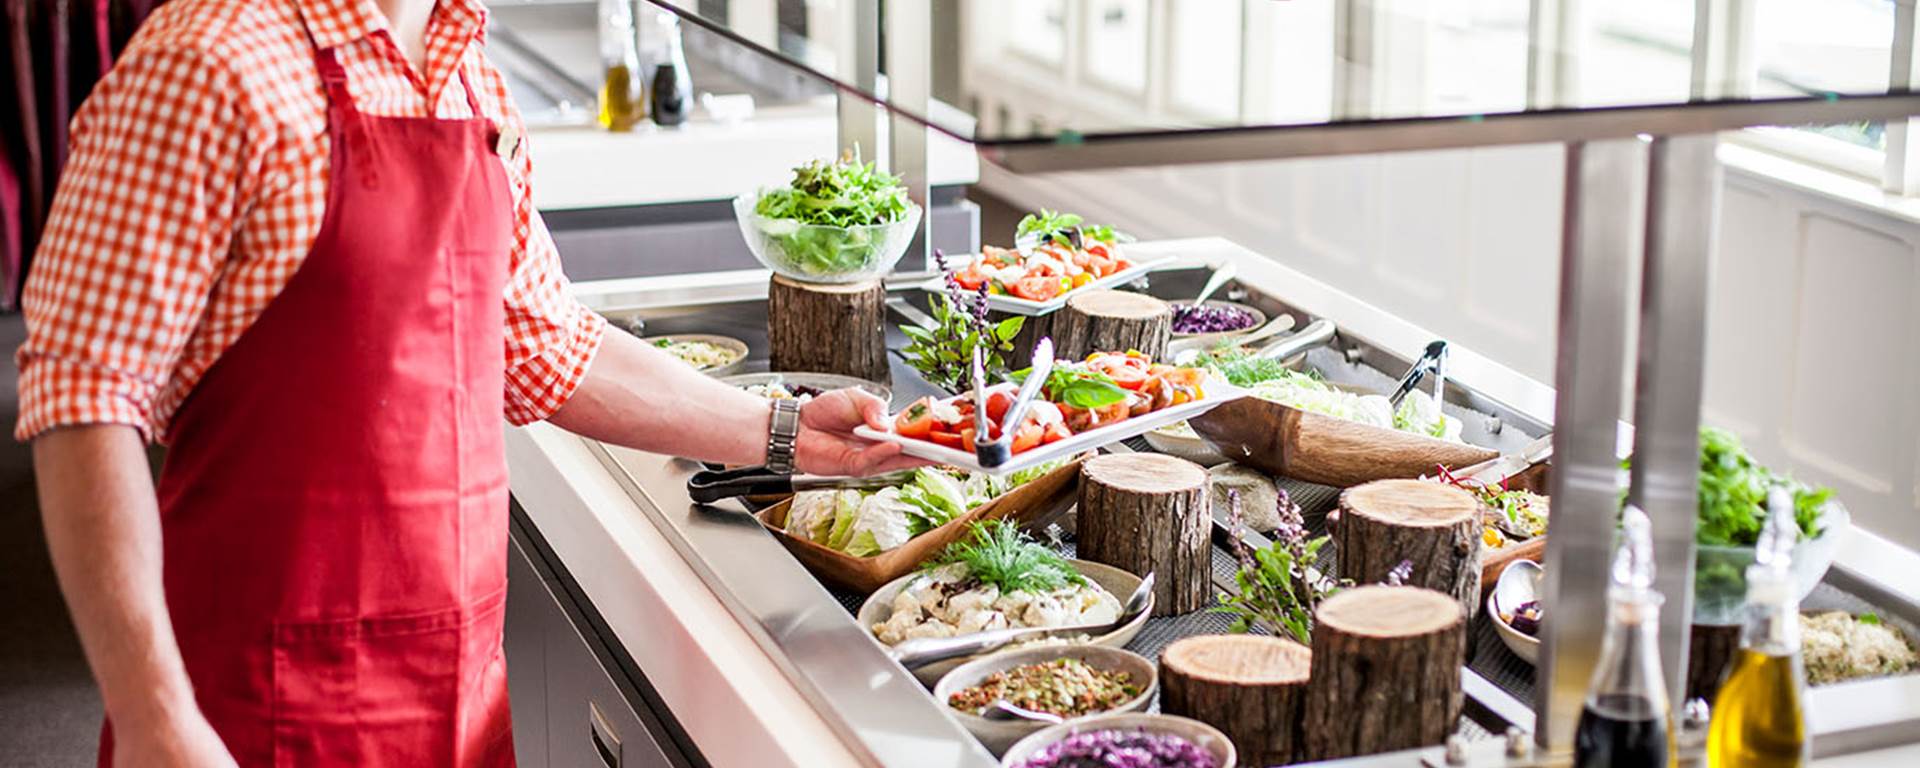 A server presents a selection of fresh salads and vegetables as a buffet station